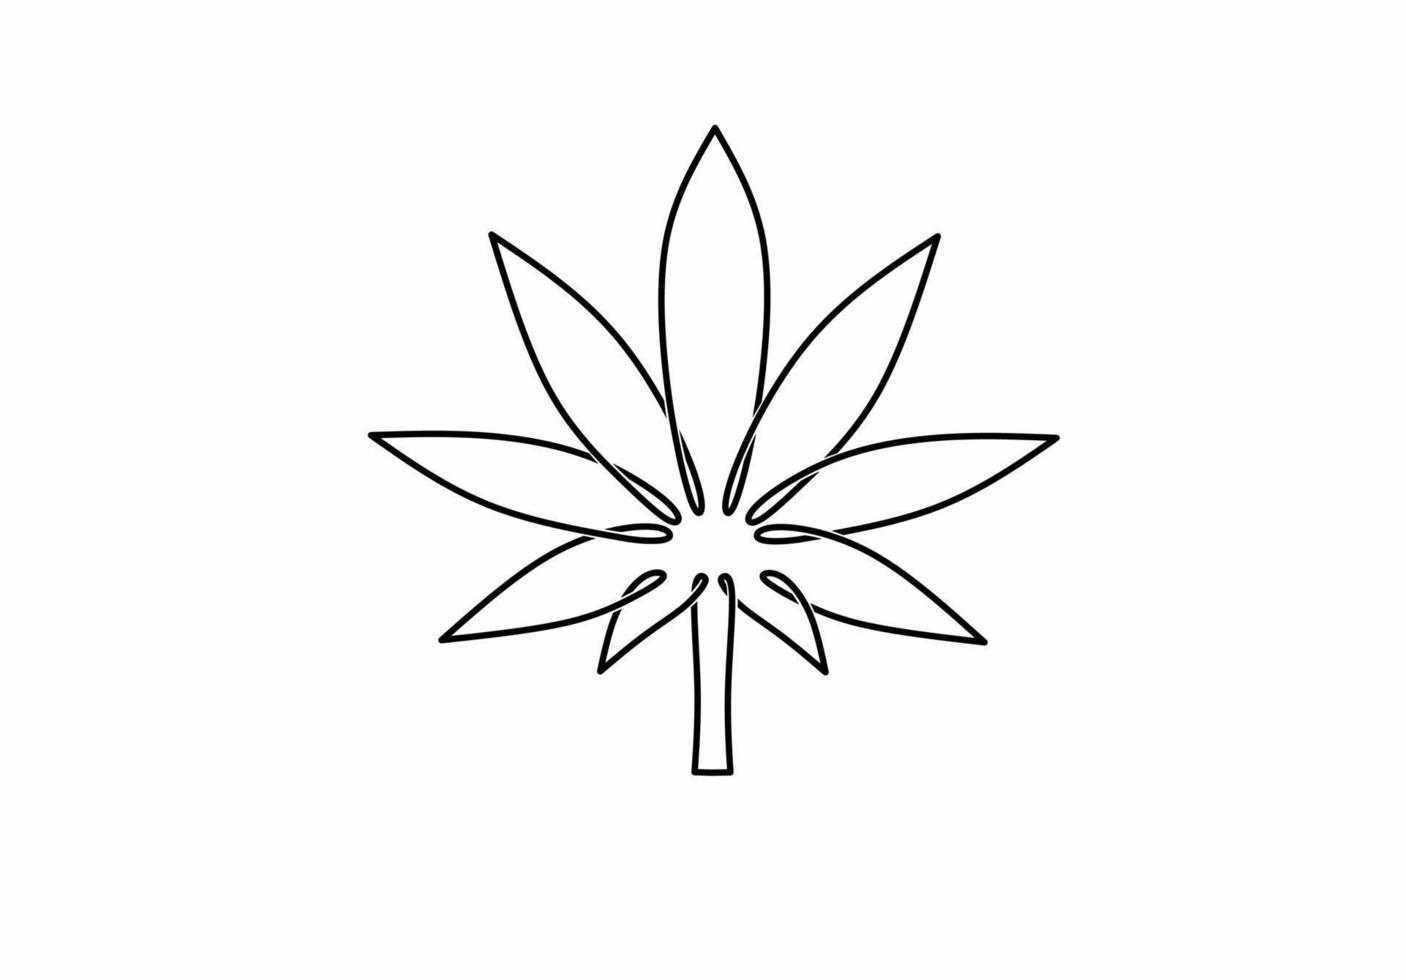 hand drawn marijuana leaf logo.continuos line cannabis icon isolated on white background vector